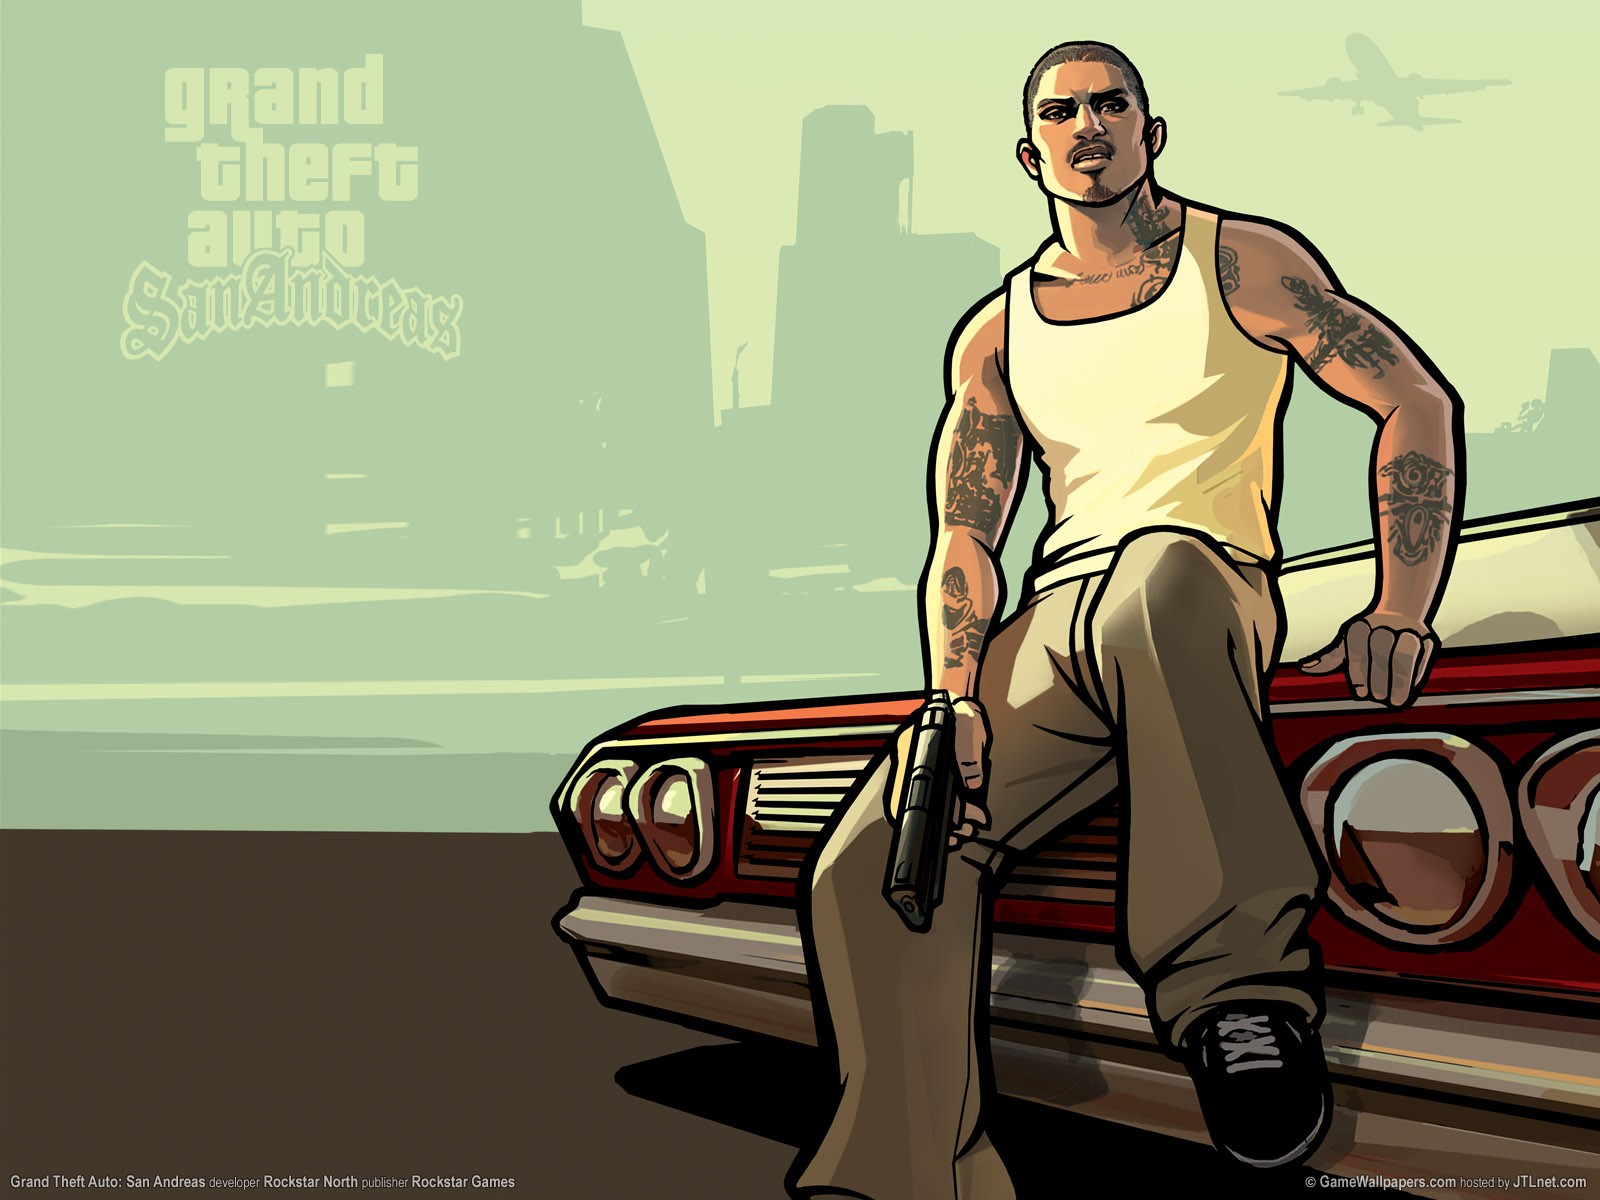 If you thought Grand Theft Auto III and Vice City were liberating, then San Andreas was an epiphany.